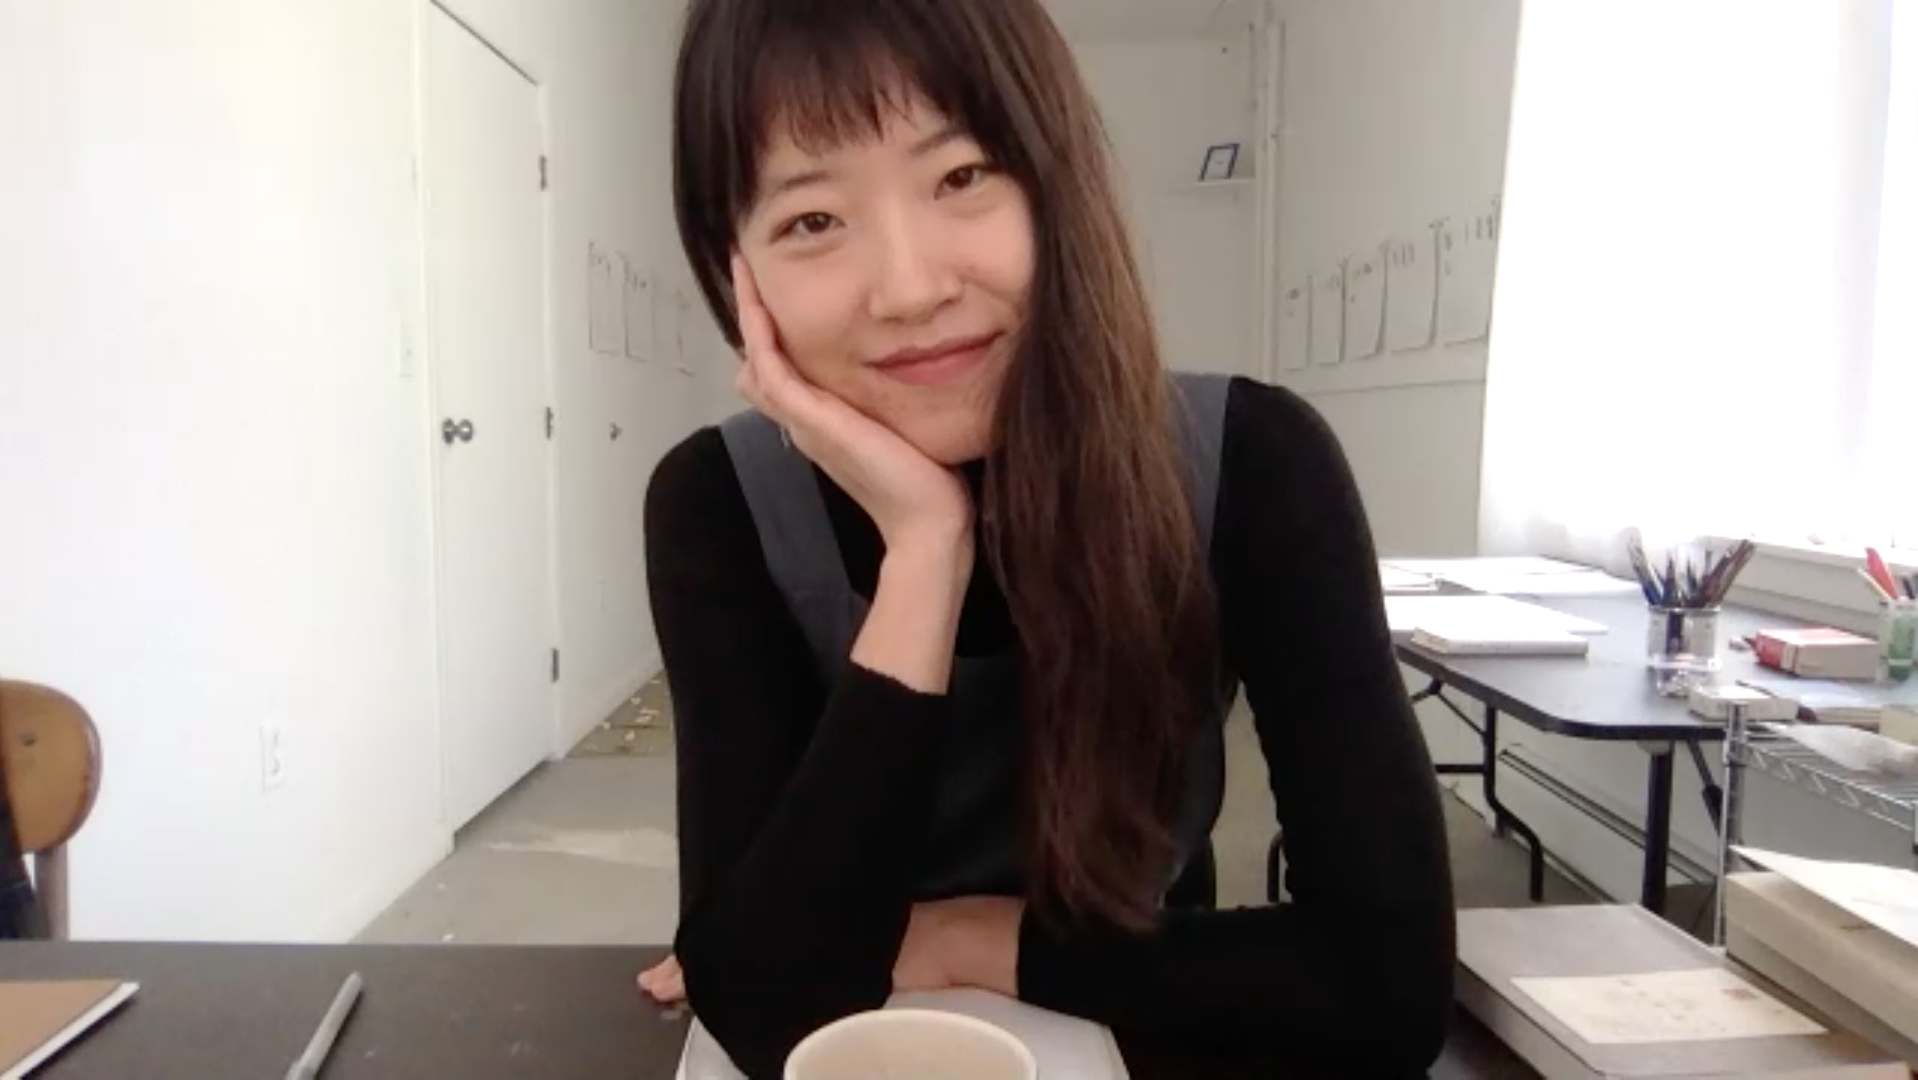 Screenshot of Chang Yuchen sitting in her studio at her desk during the interview, with her left arm resting on the desk and her head resting in her right hand, smiling into the camera.